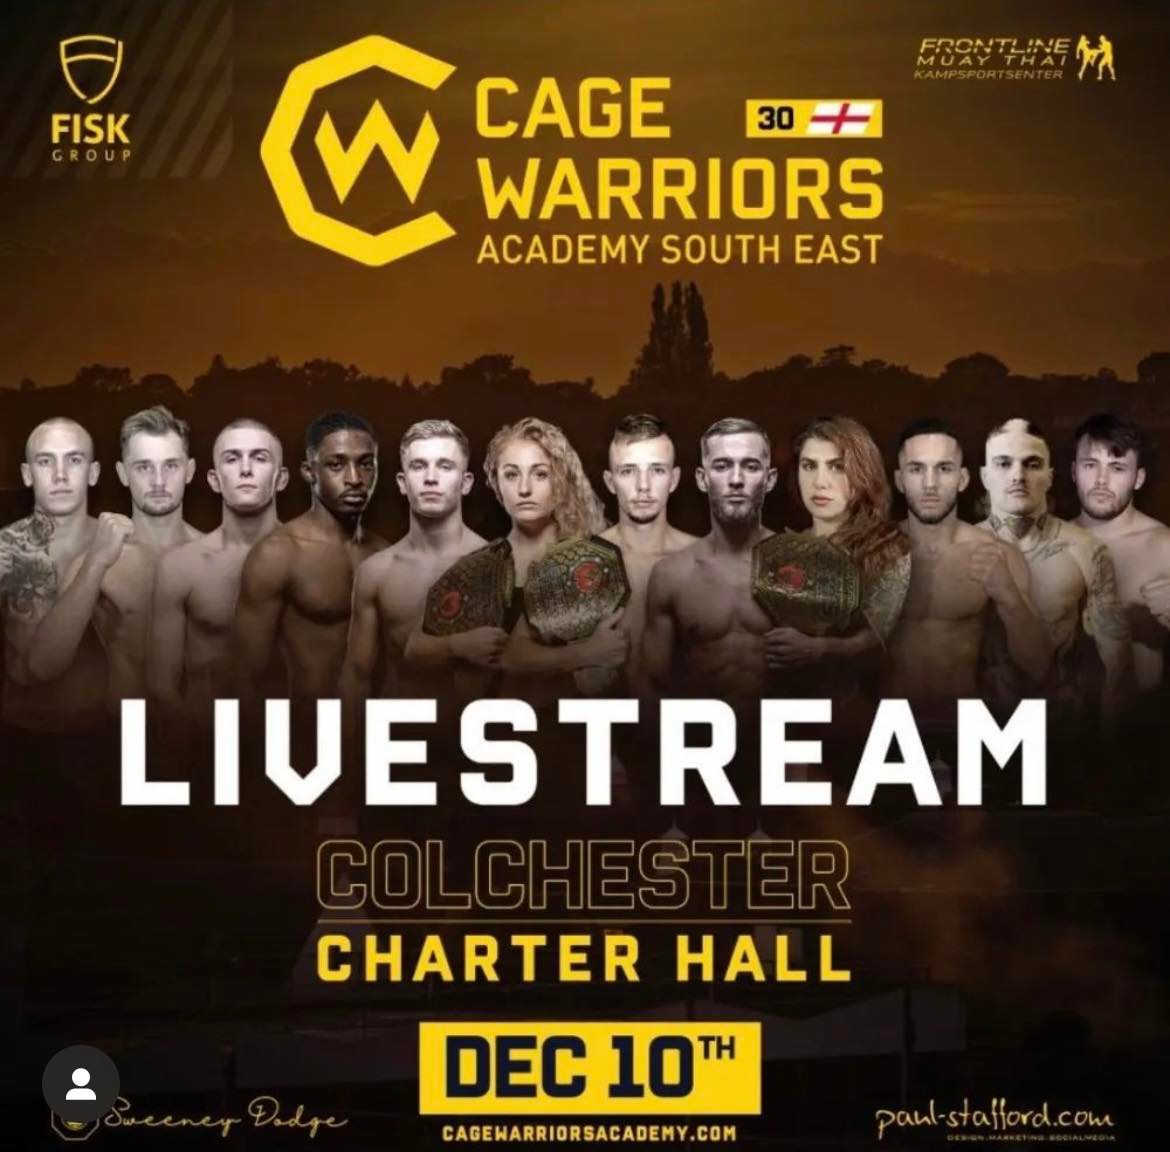 Cage Warriors Academy South East 30